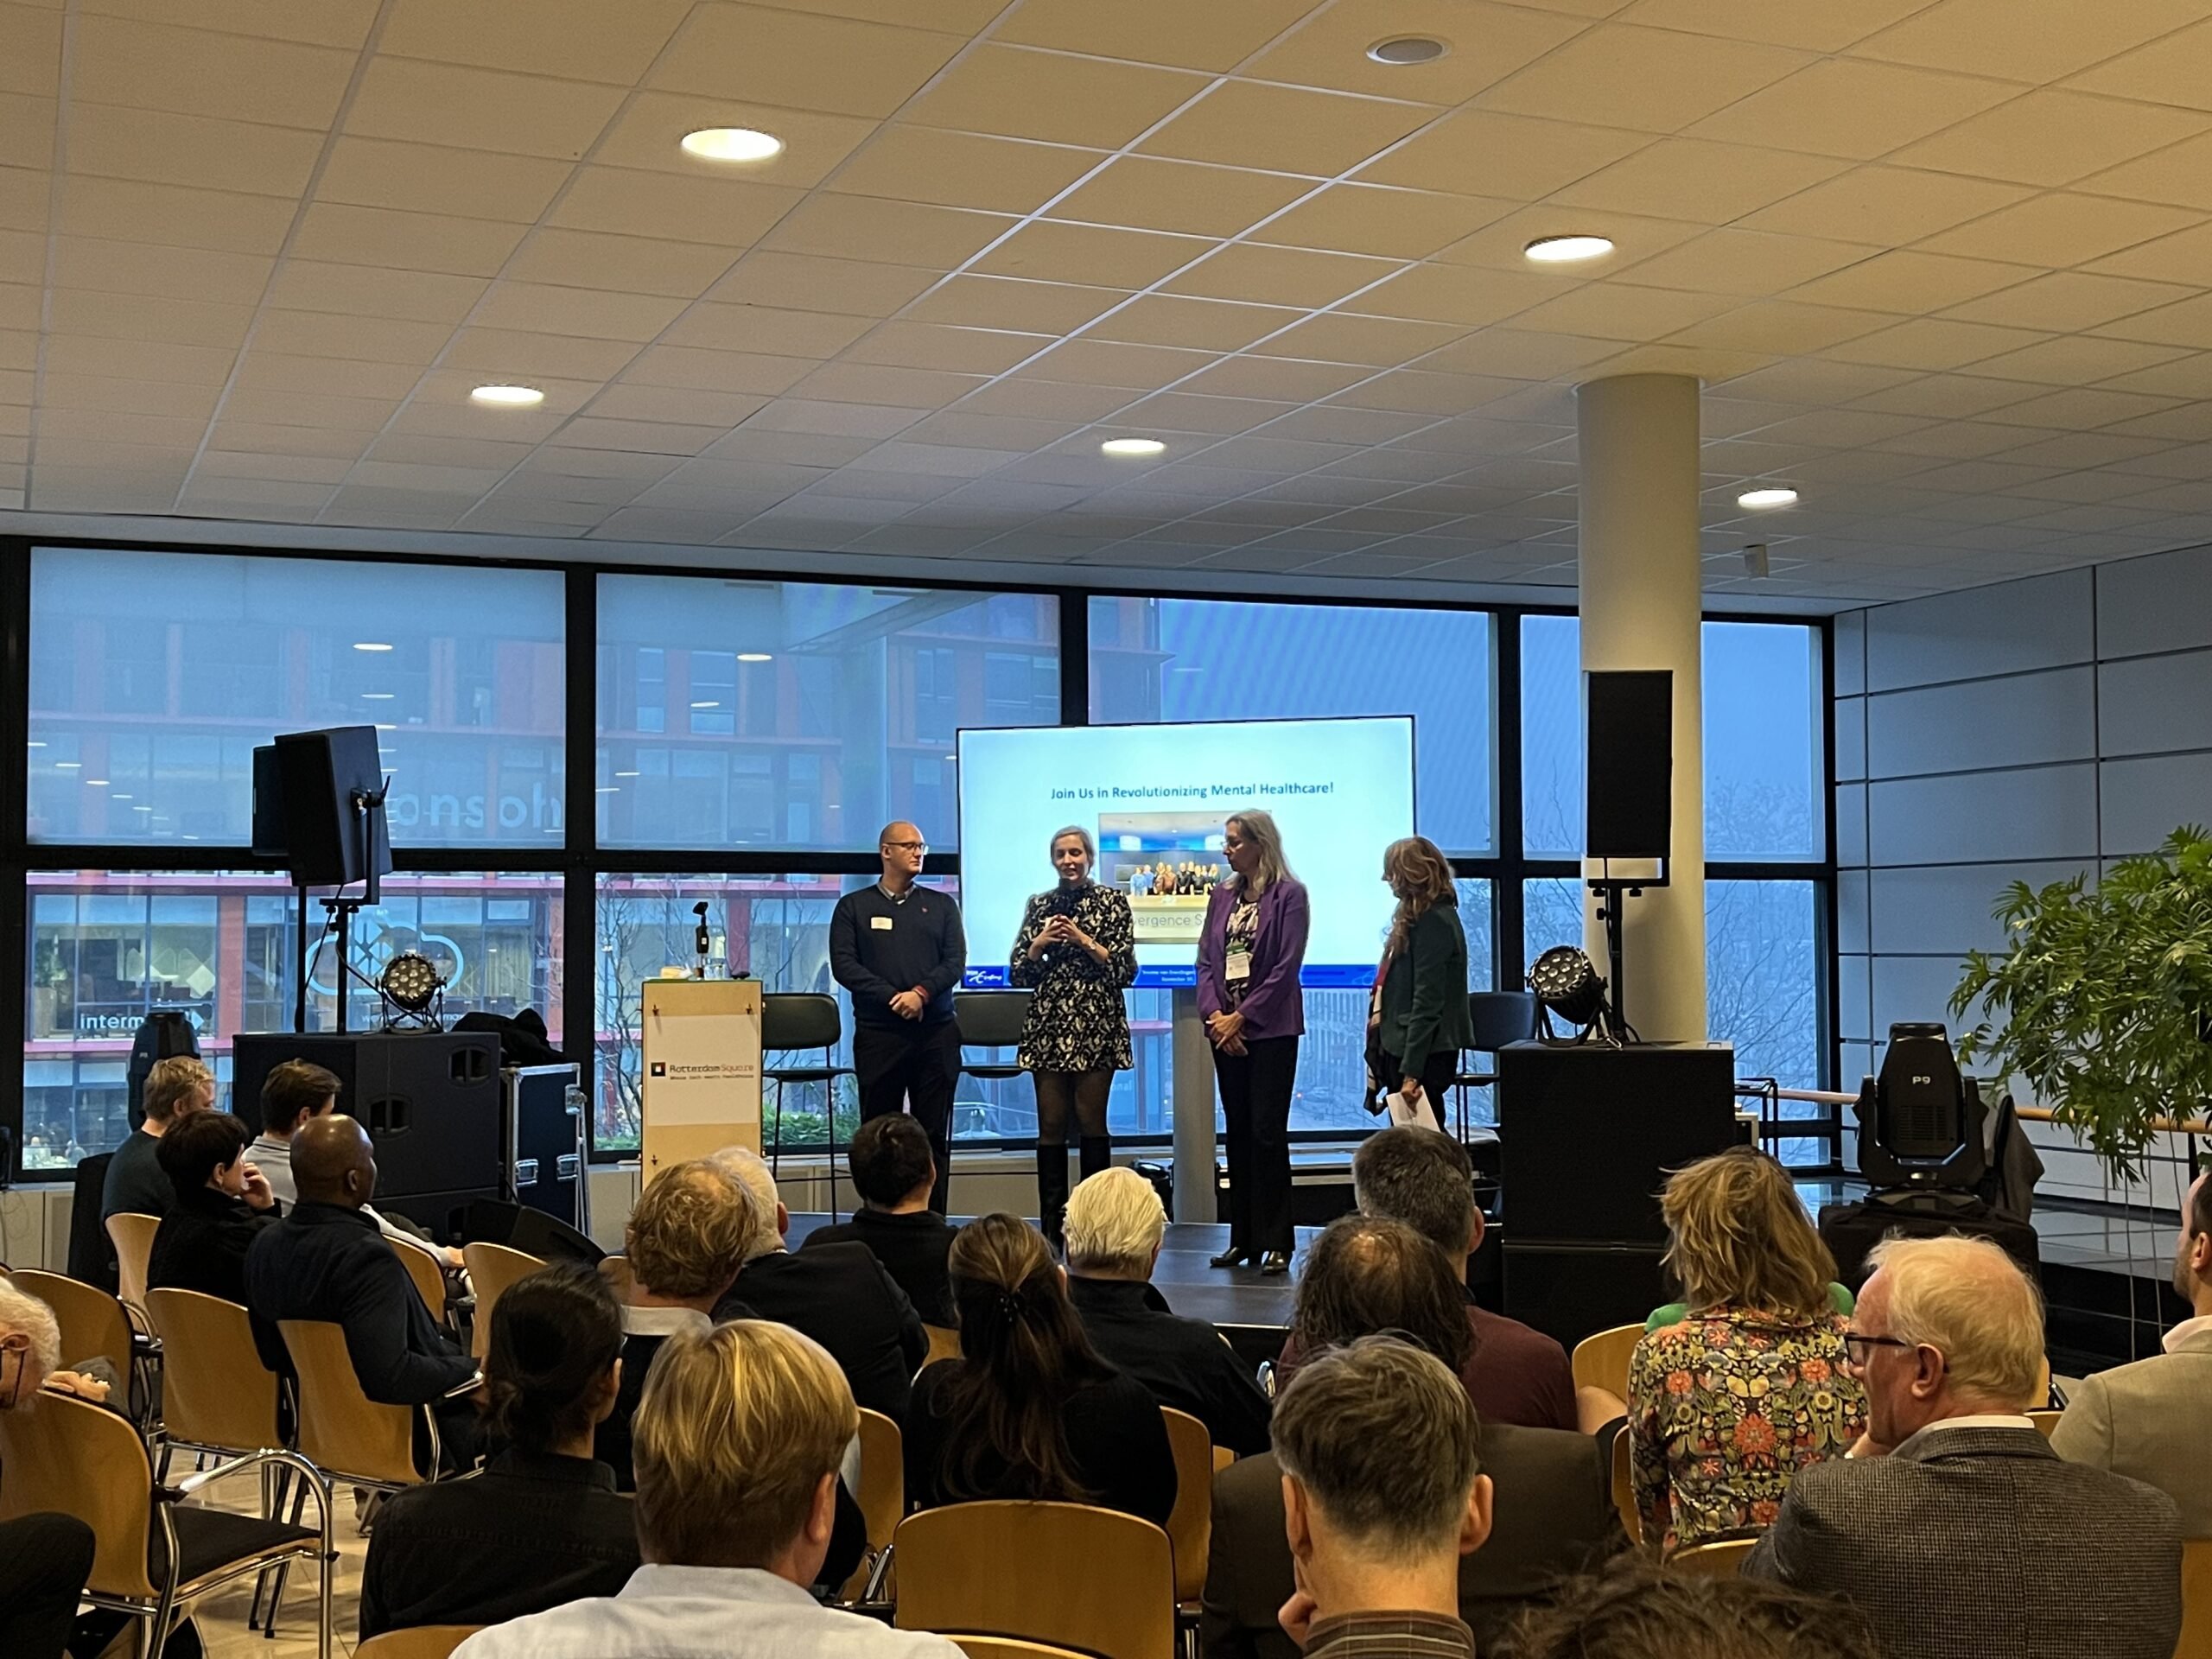 AR and VR in healthcare discussed at Rotterdam Square Breakfast